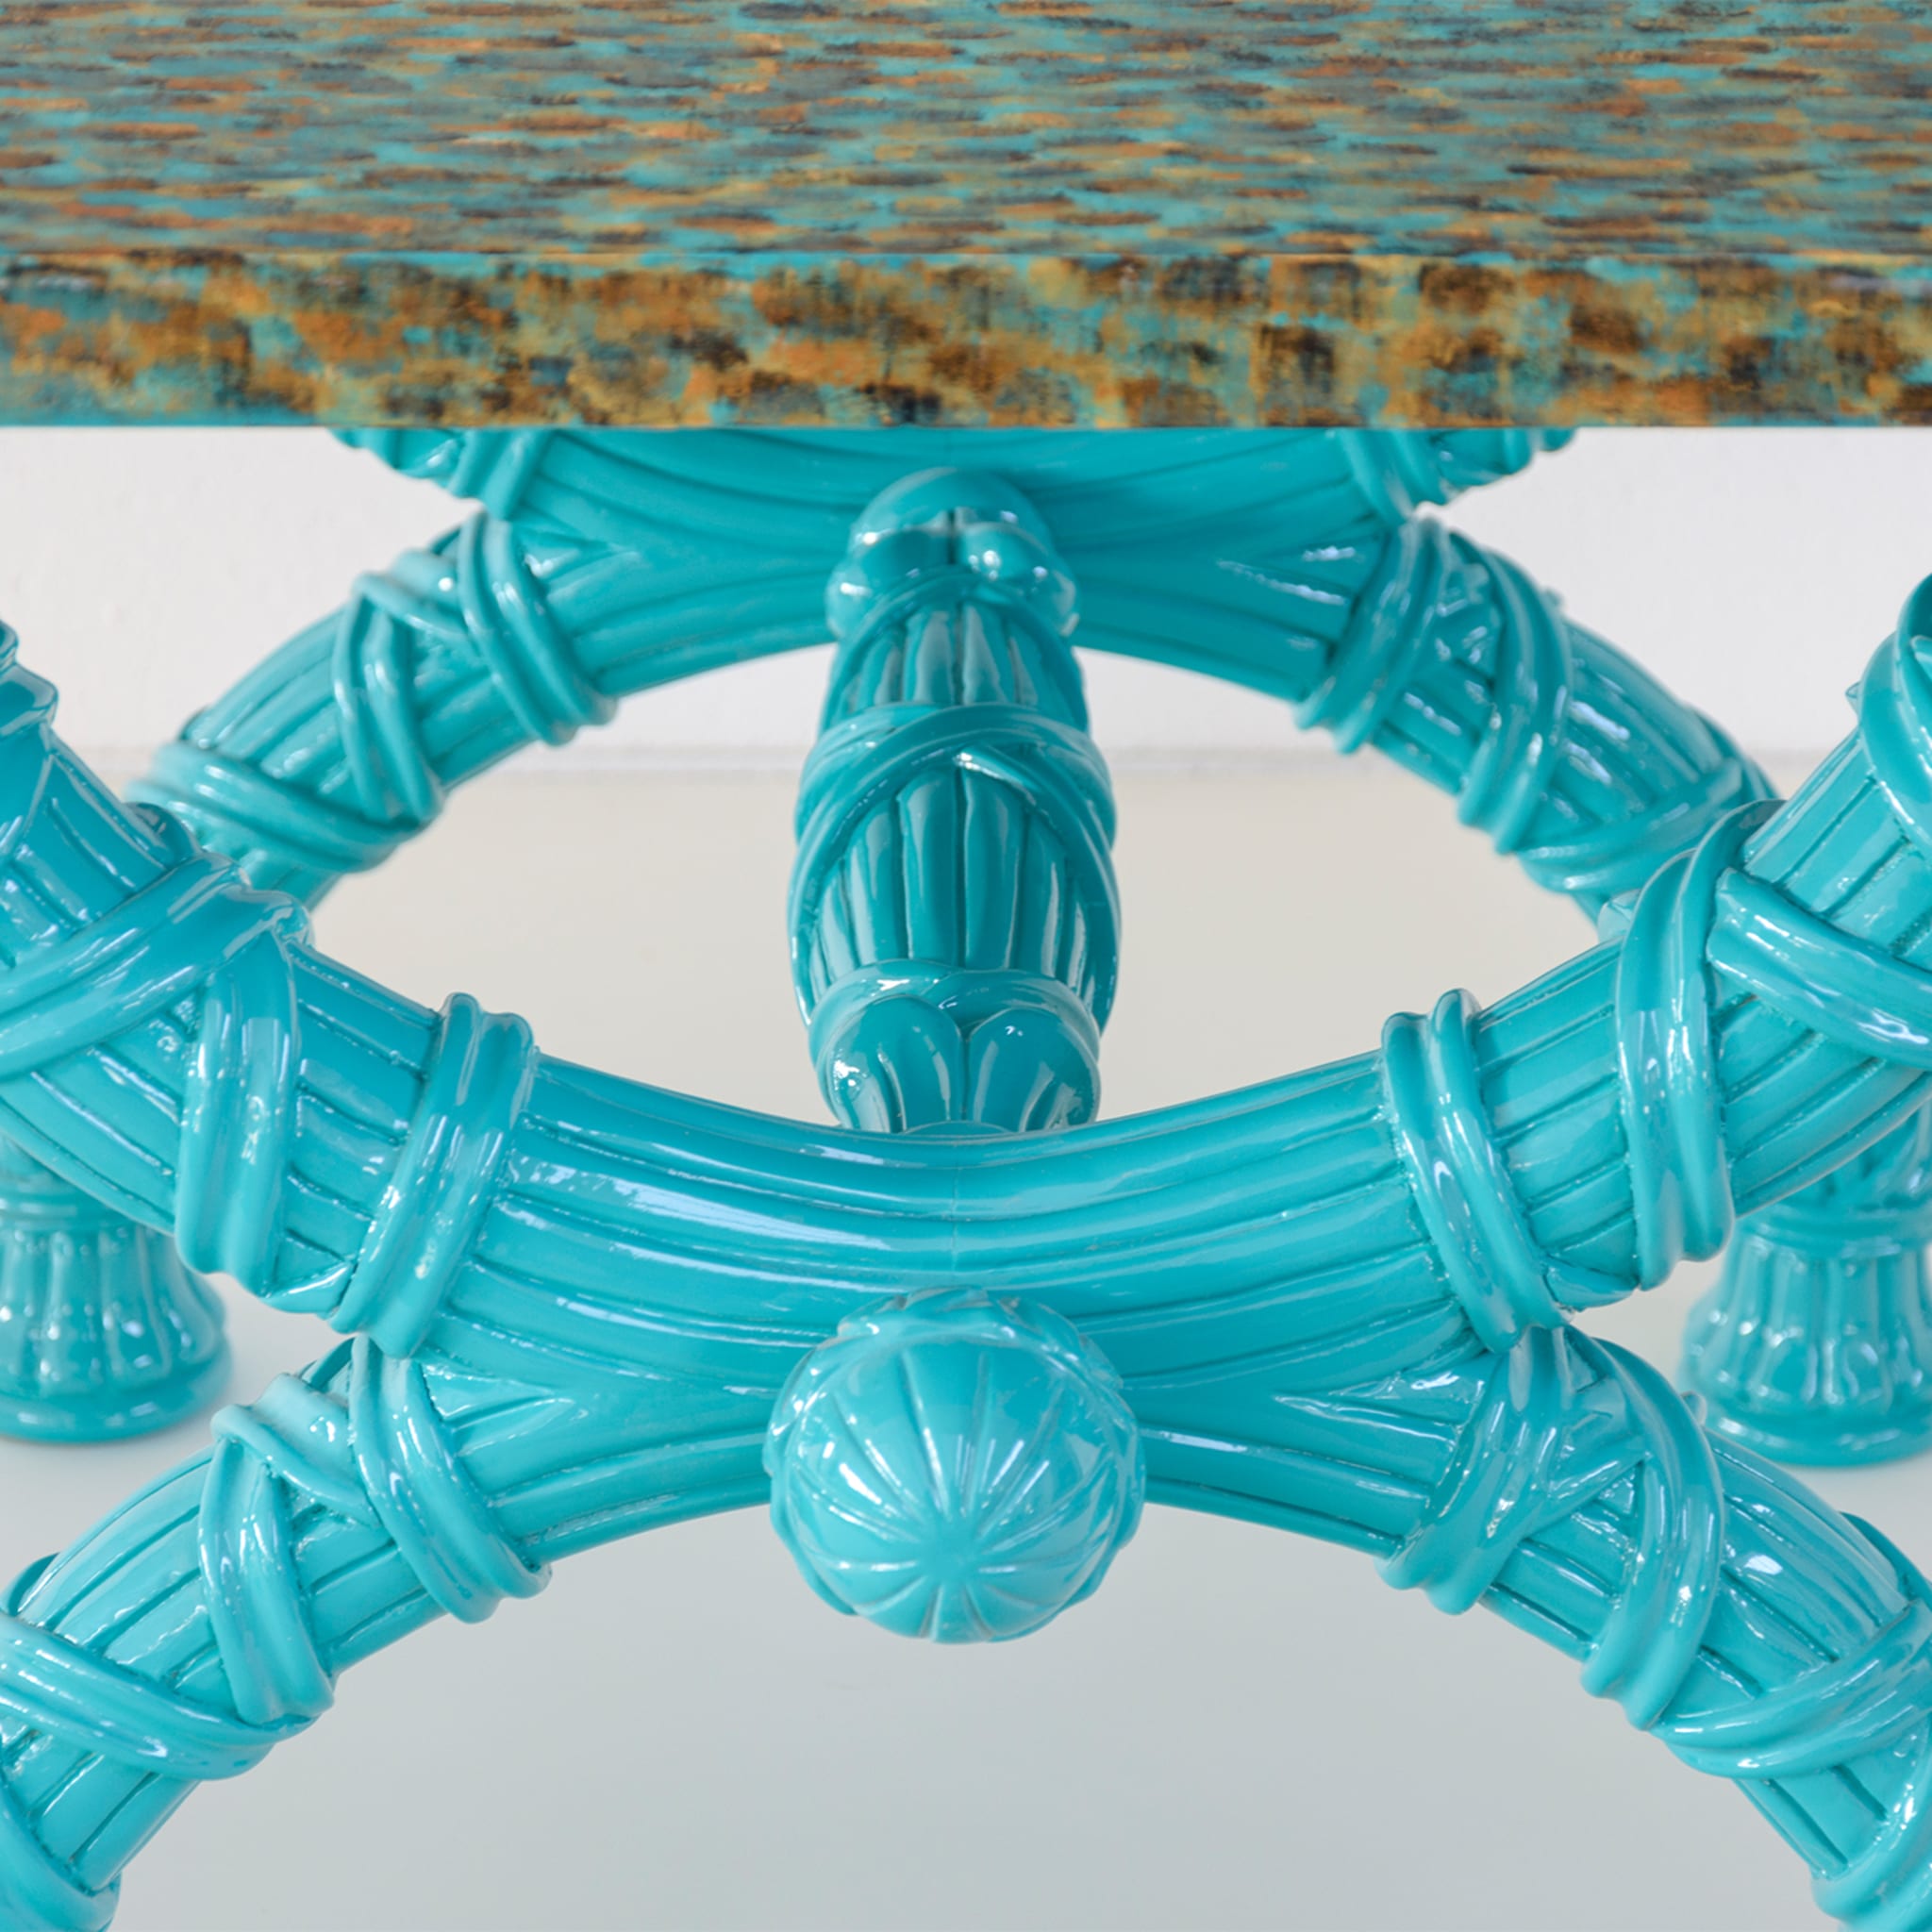 Turquoise Spider side table  - Alternative view 3